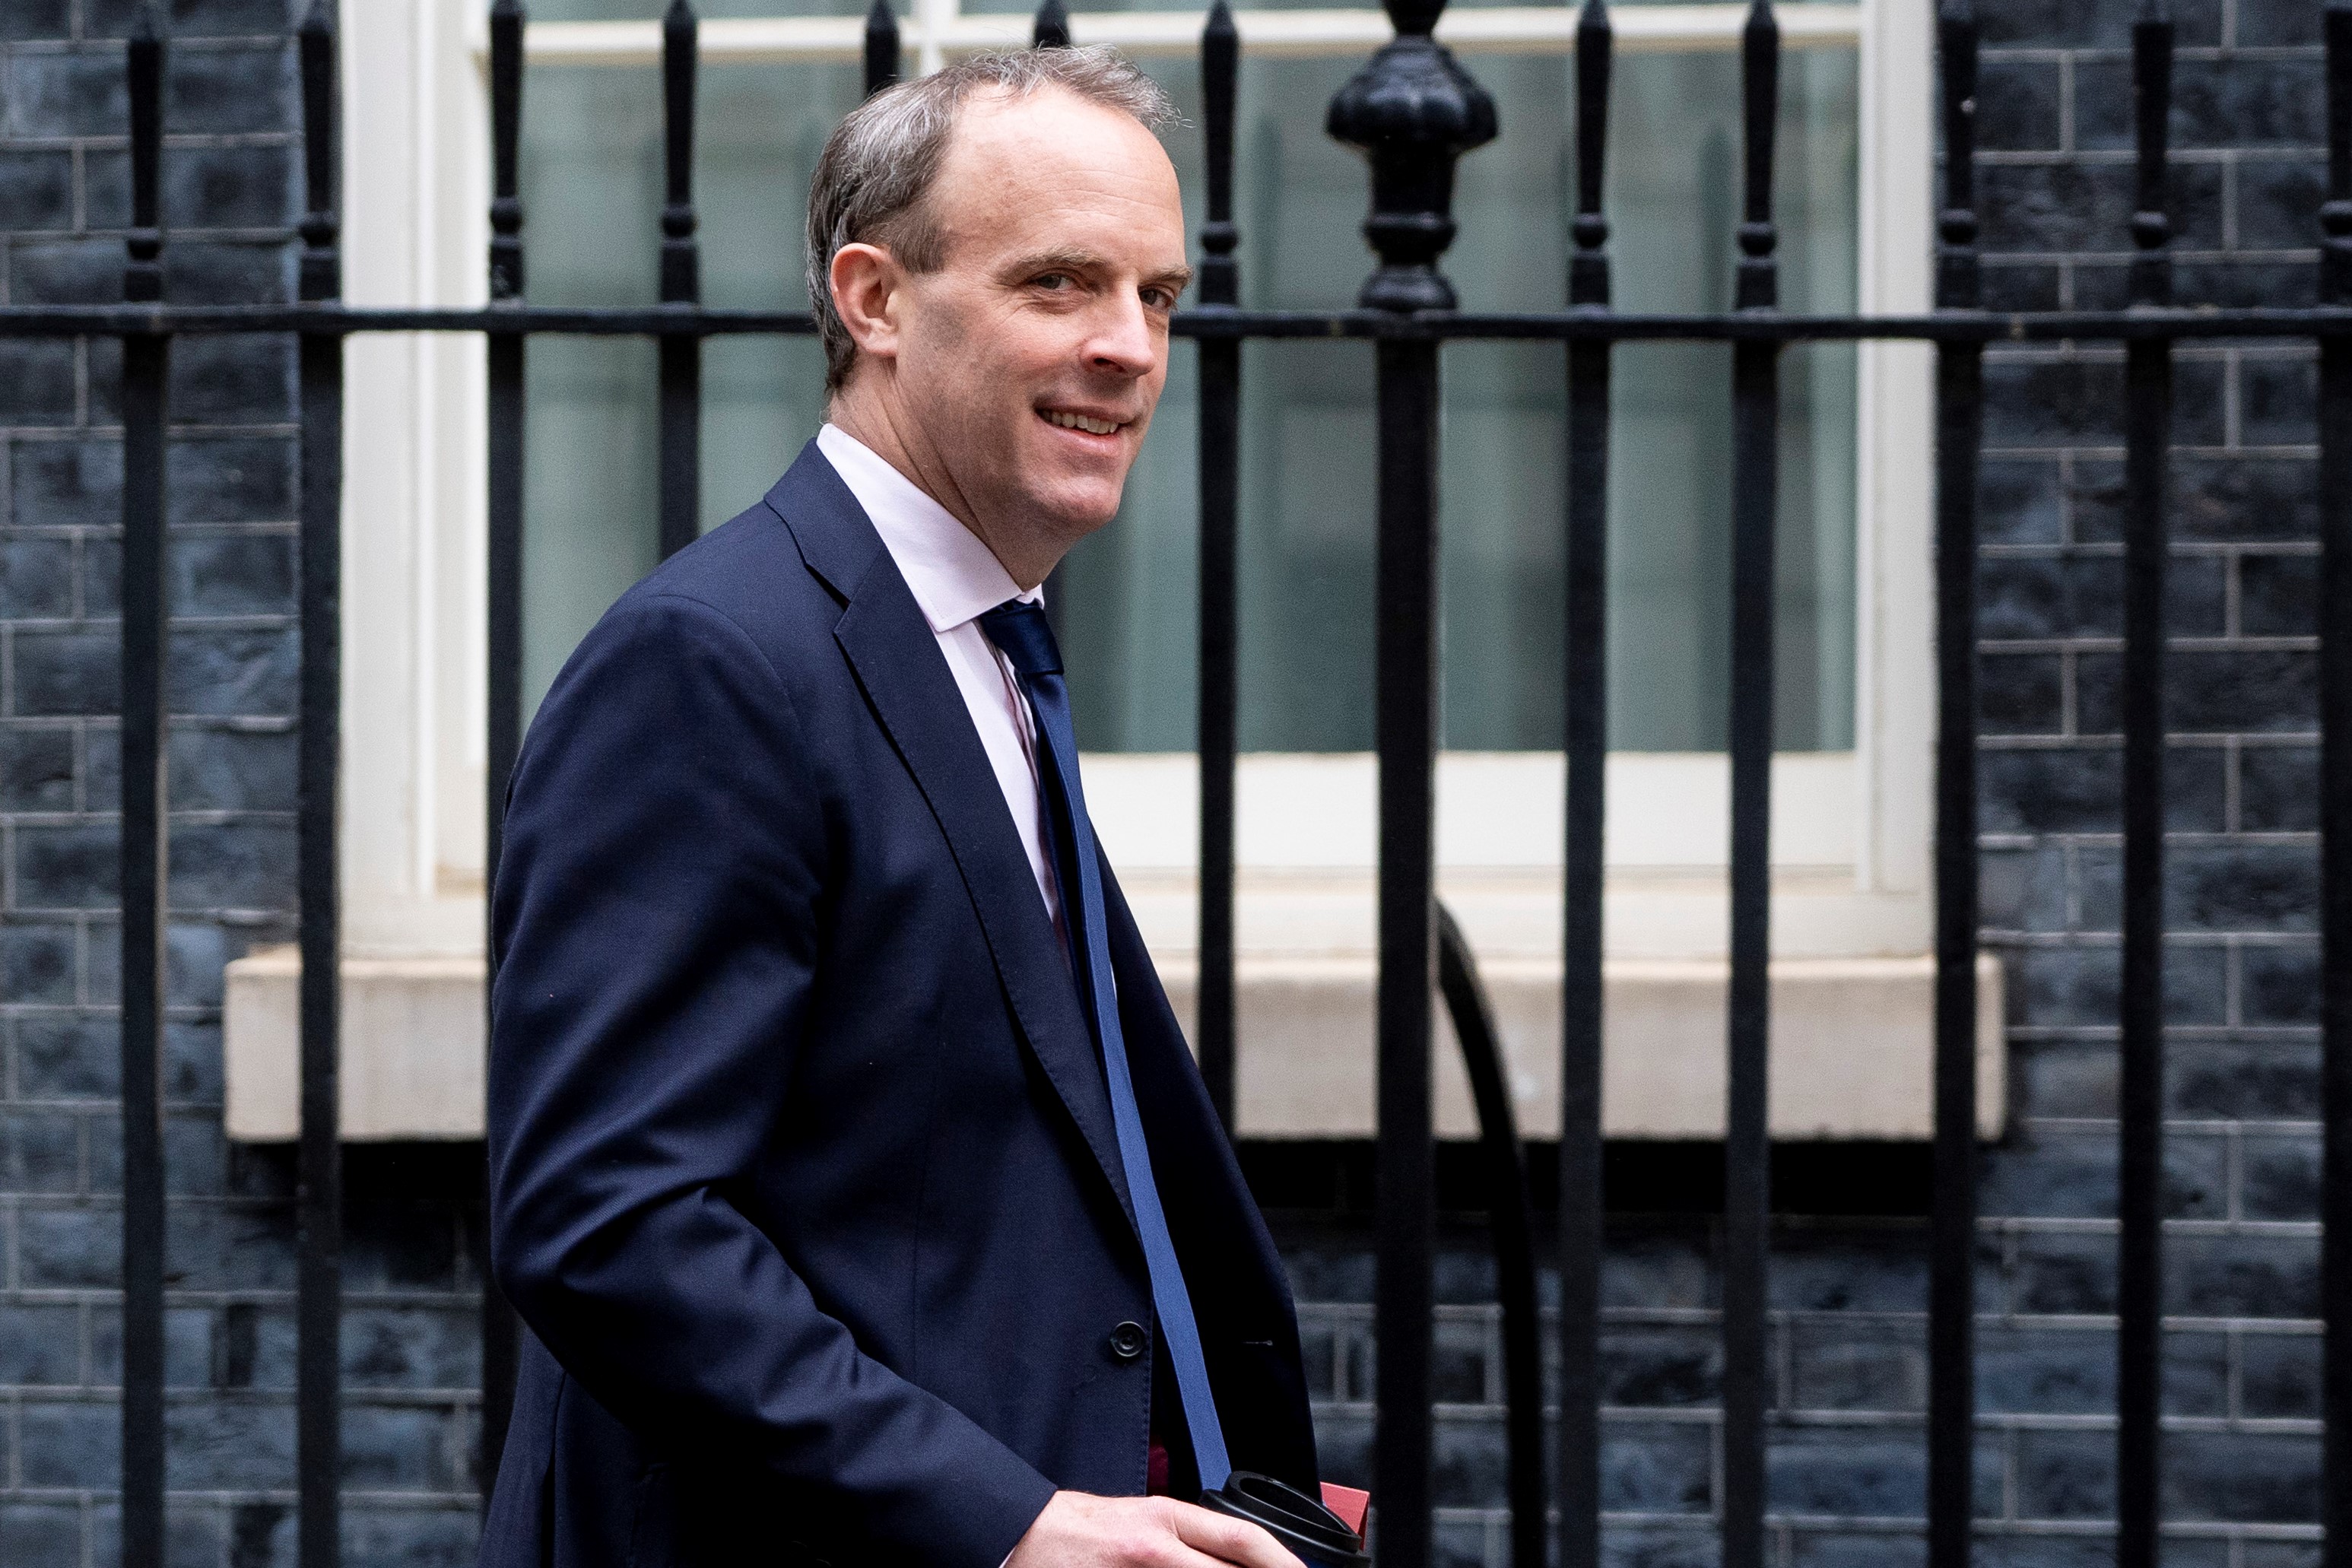 Britain's Foreign Secretary Dominic Raab arrives in Downing Street in central London on April 30, 2020 for the daily novel coronavirus COVID-19 briefing